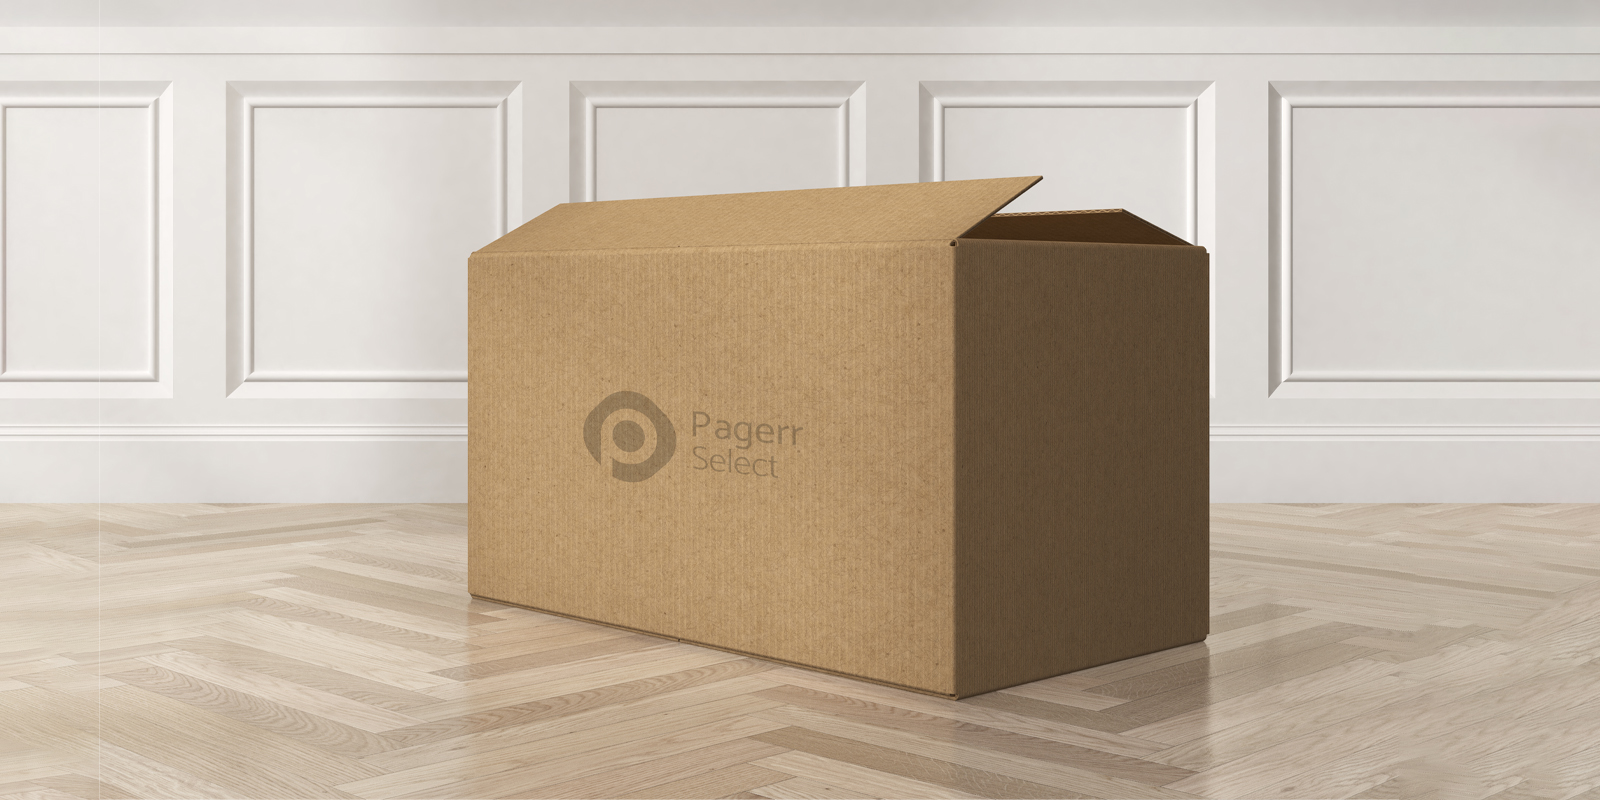 Moving boxes in Barcelona - Print with Pagerr